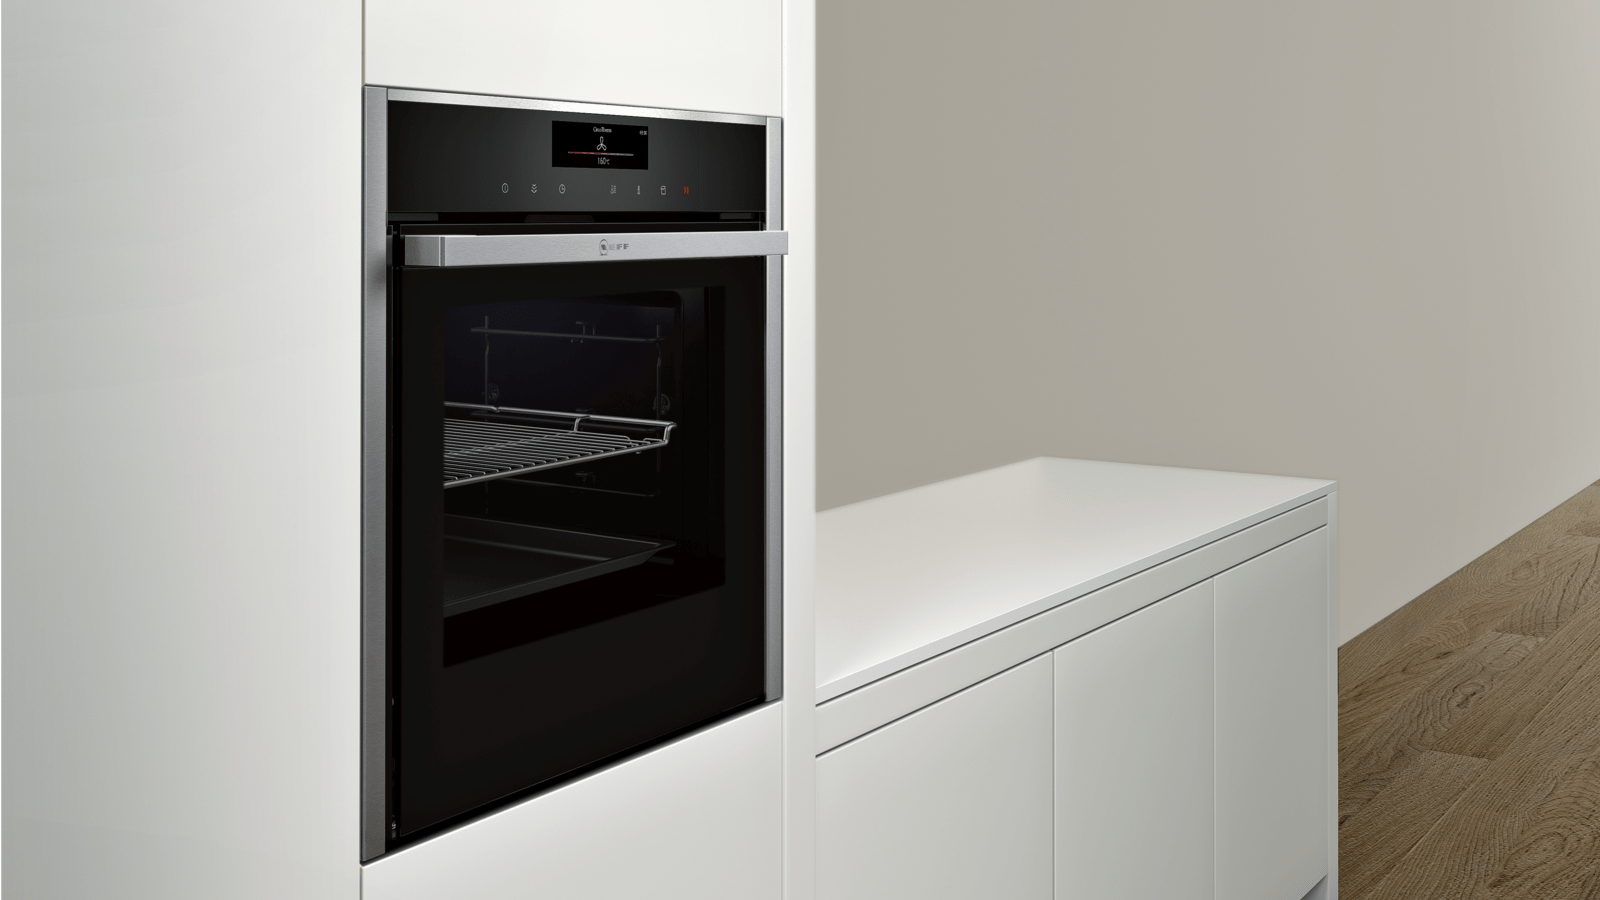 How To Choose An Energy Efficient Oven